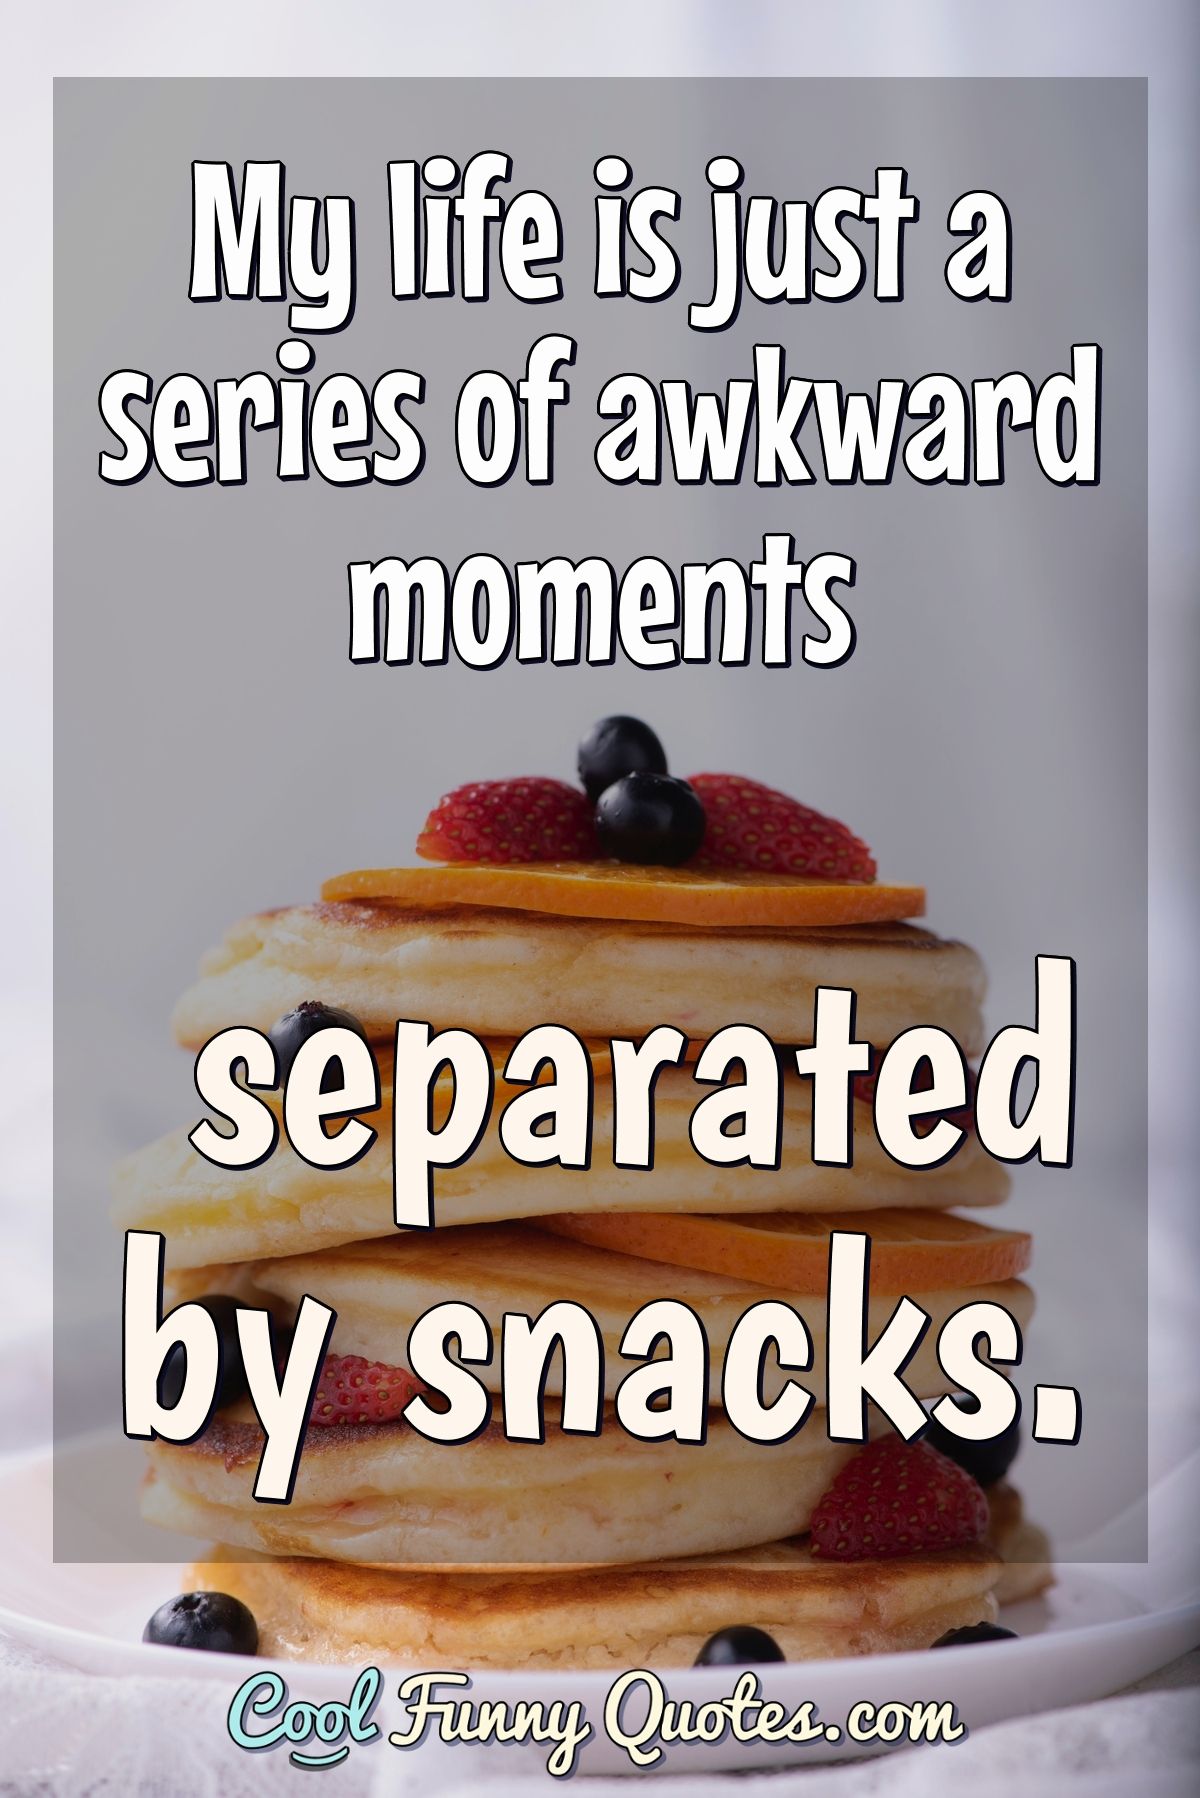 My life is just a series of awkward moments separated by snacks. - Anonymous